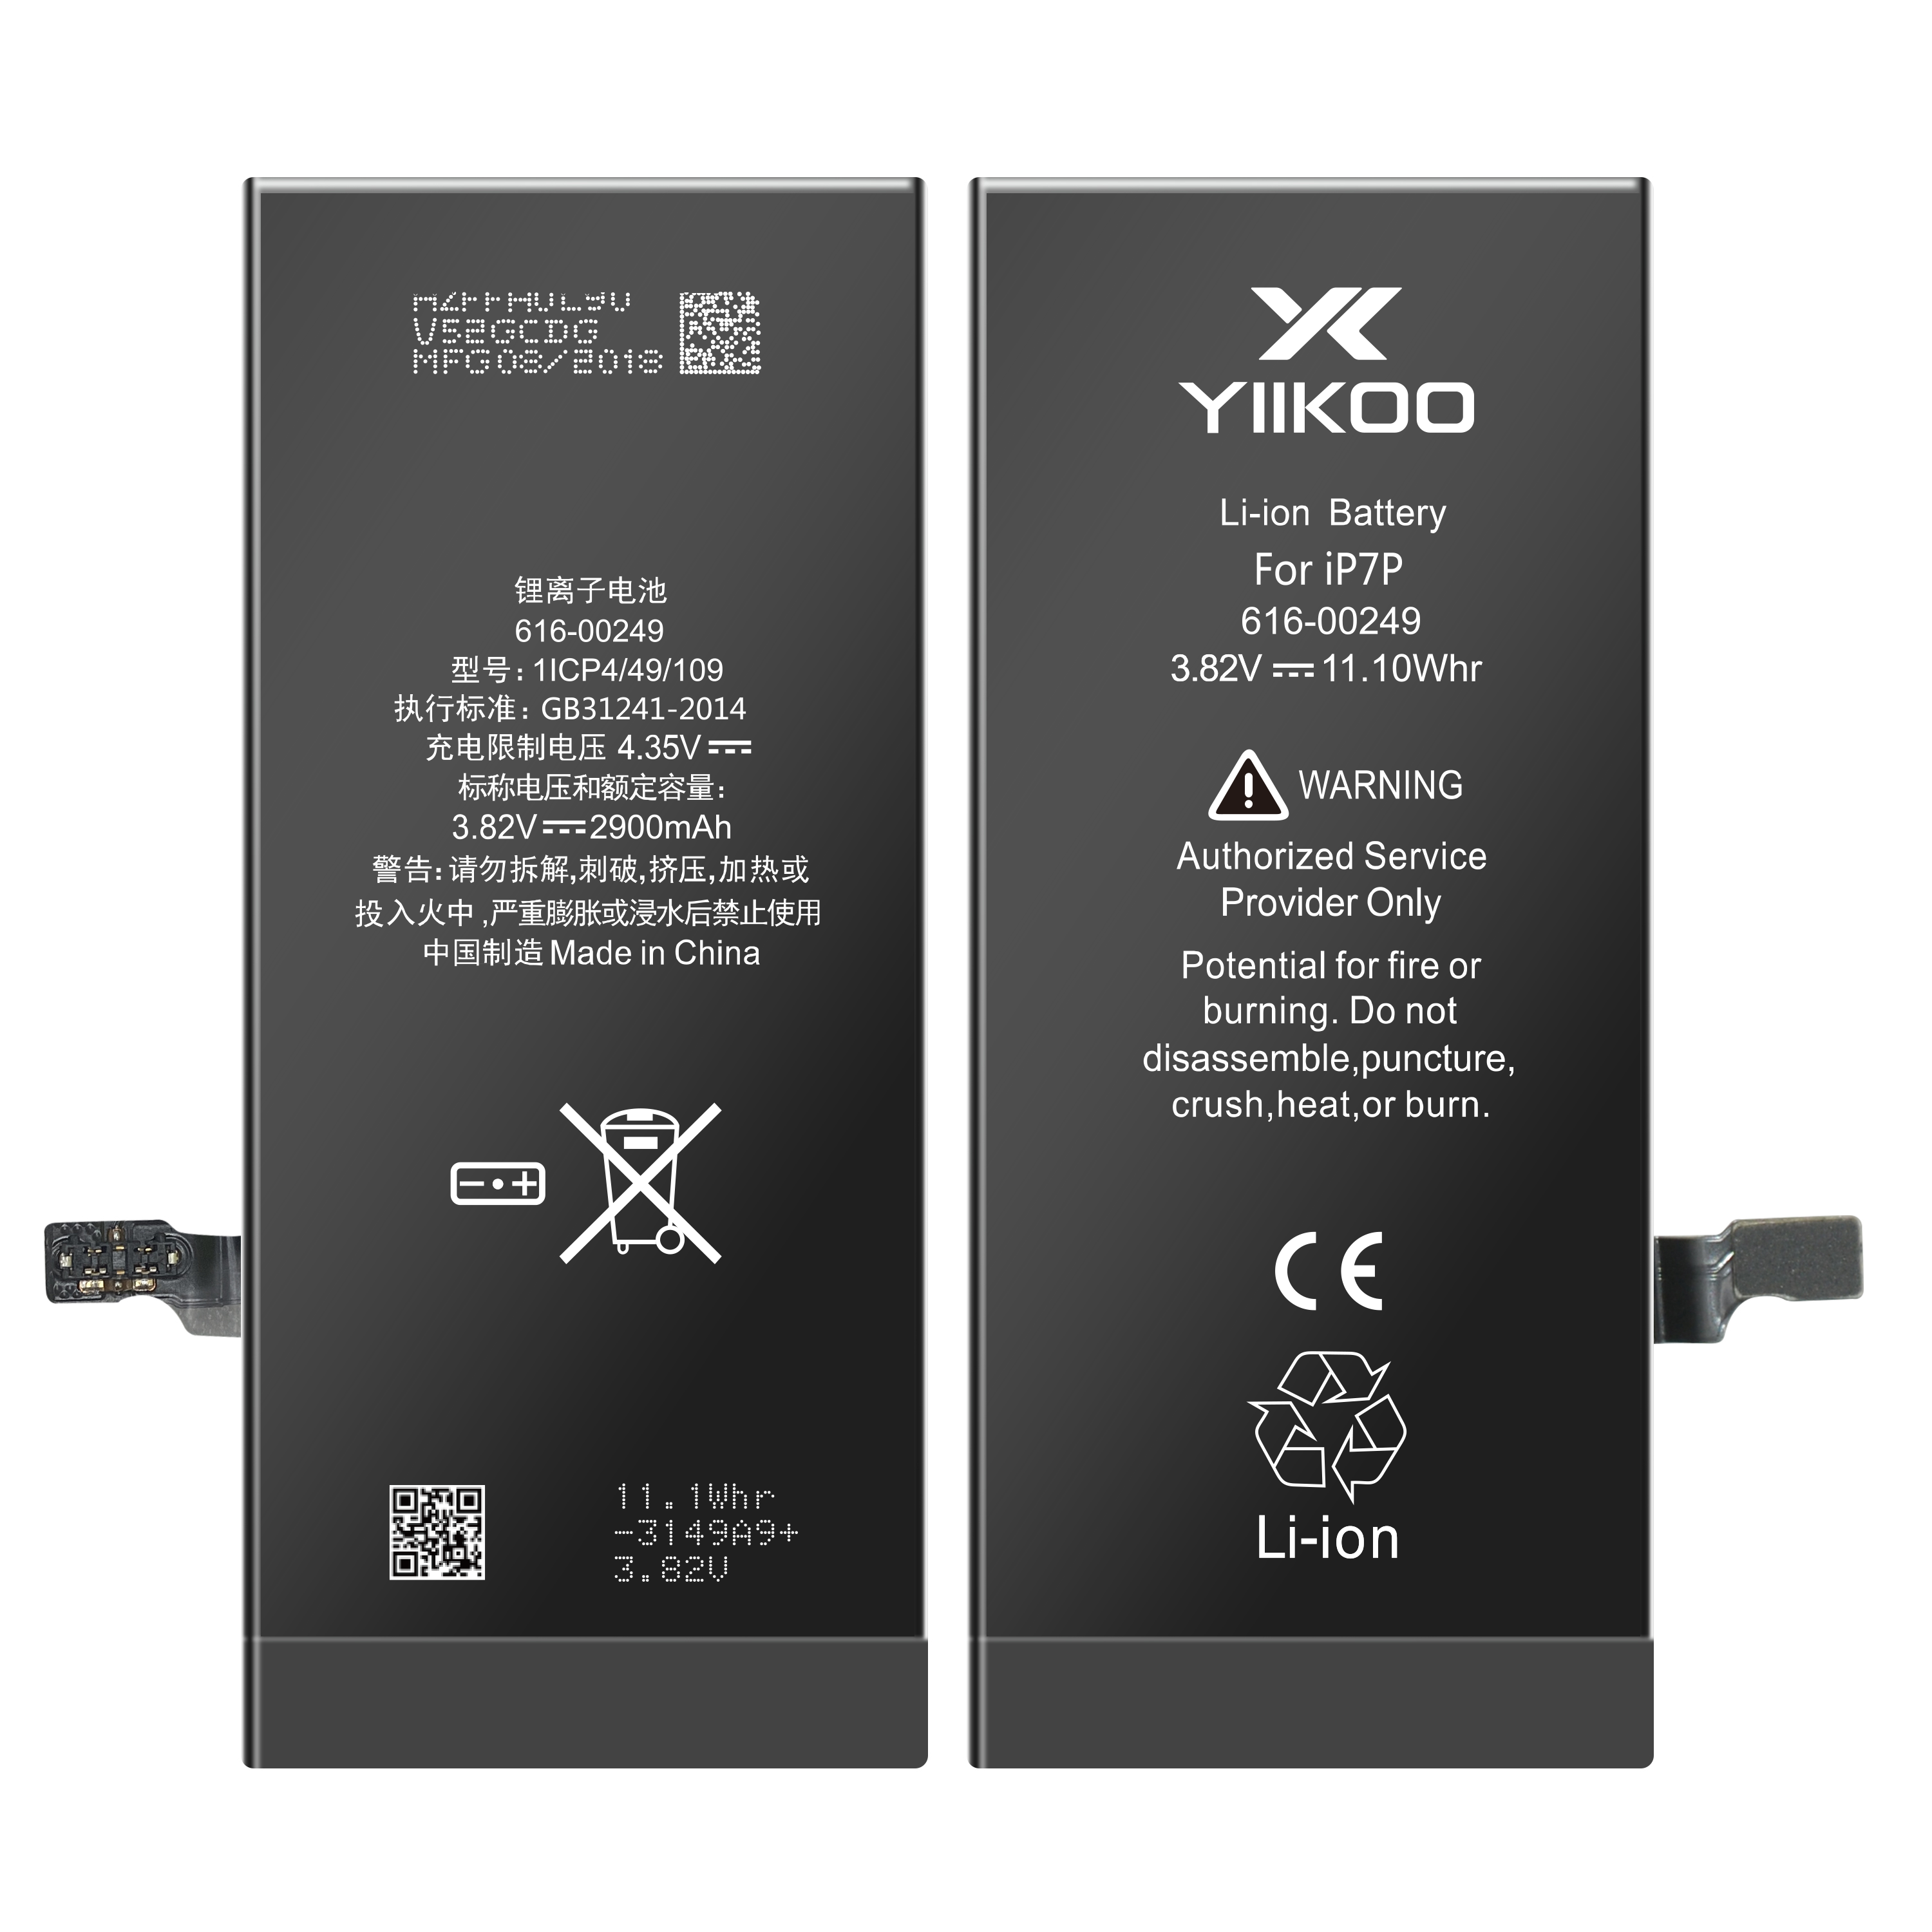 Msds 2910mah Portable Phone Battery Original Battery For Iphone 7P yiikoo Brand